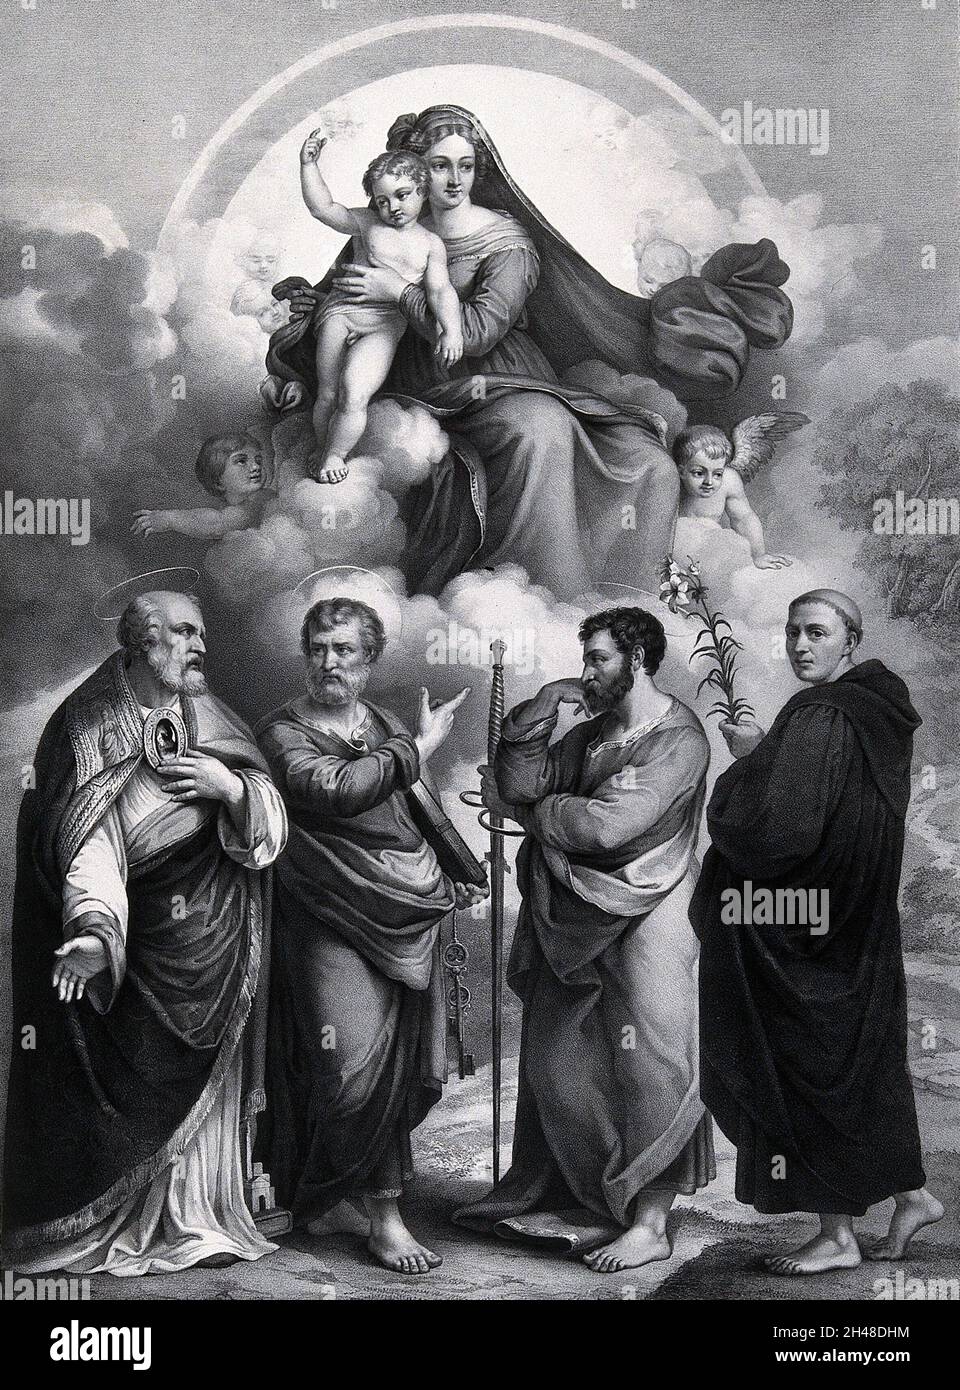 The Virgin and Child with Saint Geminianus of Modena, Saint Peter, Saint Paul and Saint Antony of Padua. Lithograph by F. Hanfstaengl after B. Ramenghi, il Bagnacavallo. Stock Photo